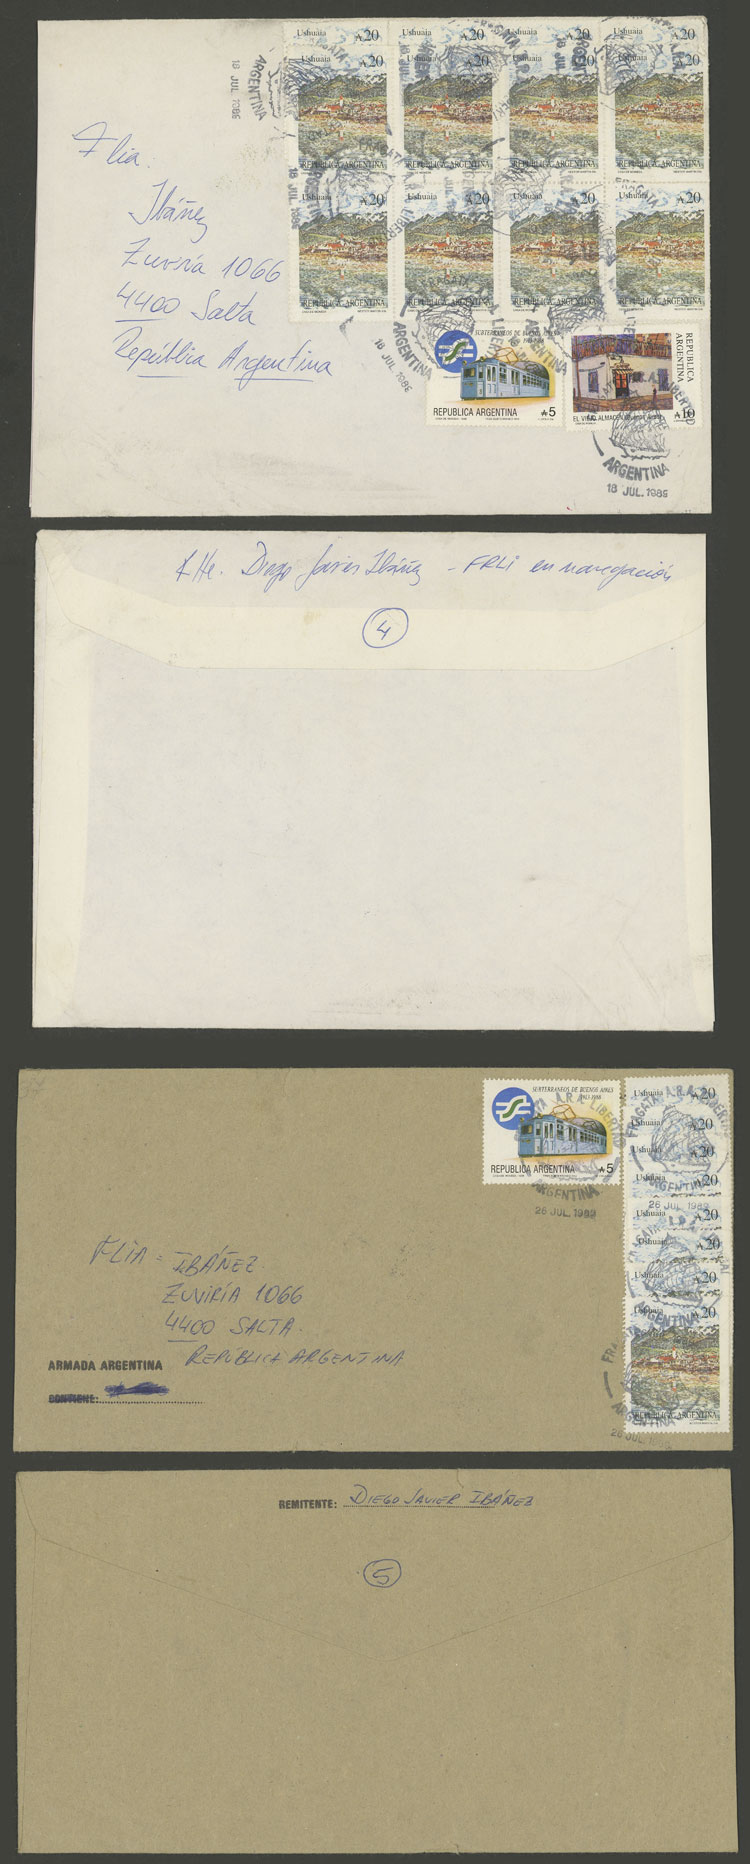 Lot 794 - Argentina postal history -  Guillermo Jalil - Philatino Auction # 2141 WORLDWIDE + ARGENTINA: General November auction